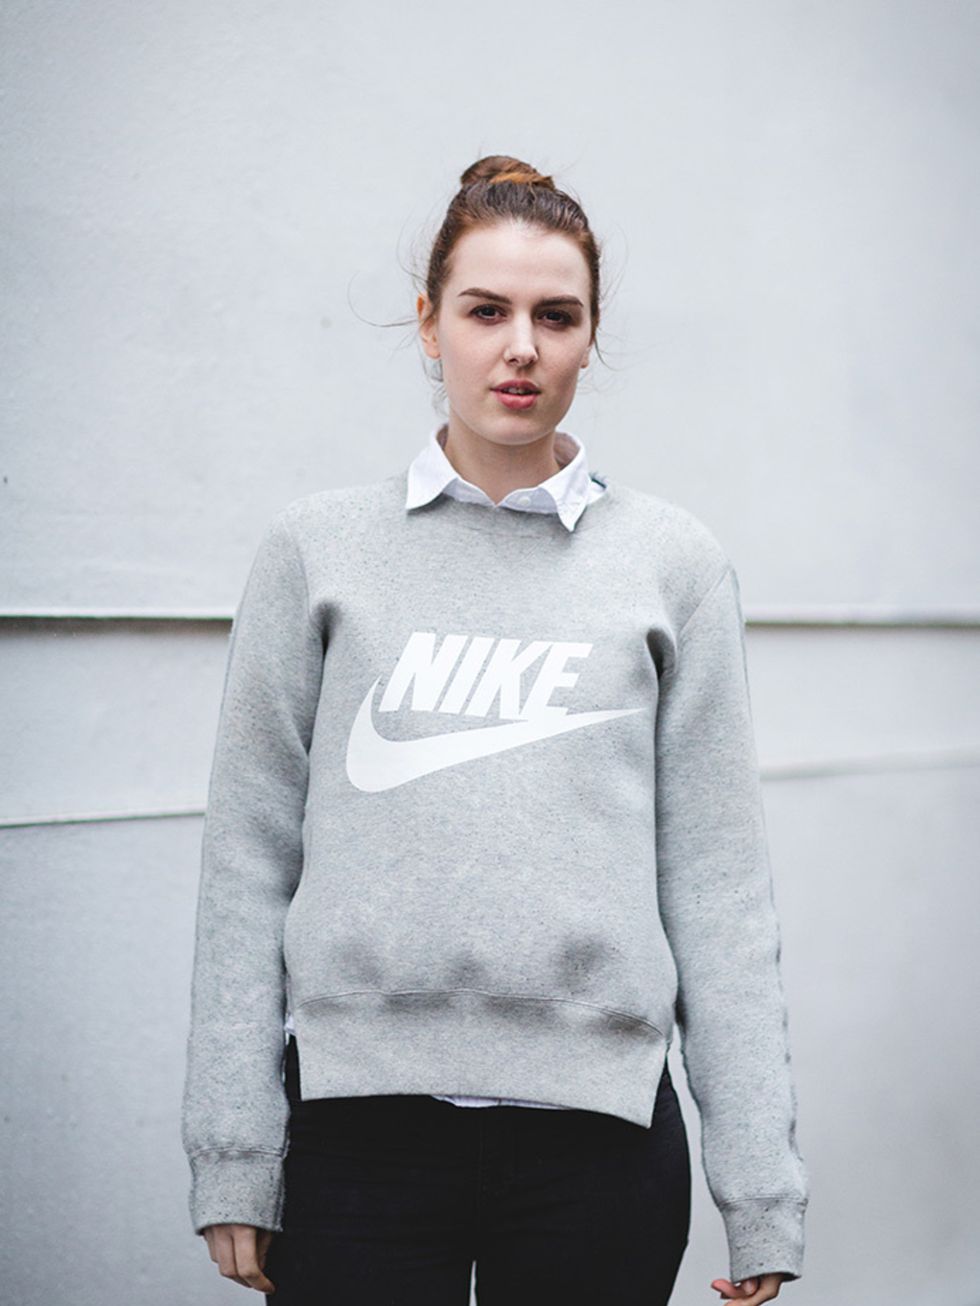 <p>Holly Rains, Acting Content Editor</p>

<p> </p>

<p><a href="http://store.nike.com/gb/en_gb/pd/nikelab-sacai-cable-back-tf-top/pid-10343361/pgid-11160754" target="_blank">Nike x Sacai</a> Knitted Sweatshirt, £280 </p>